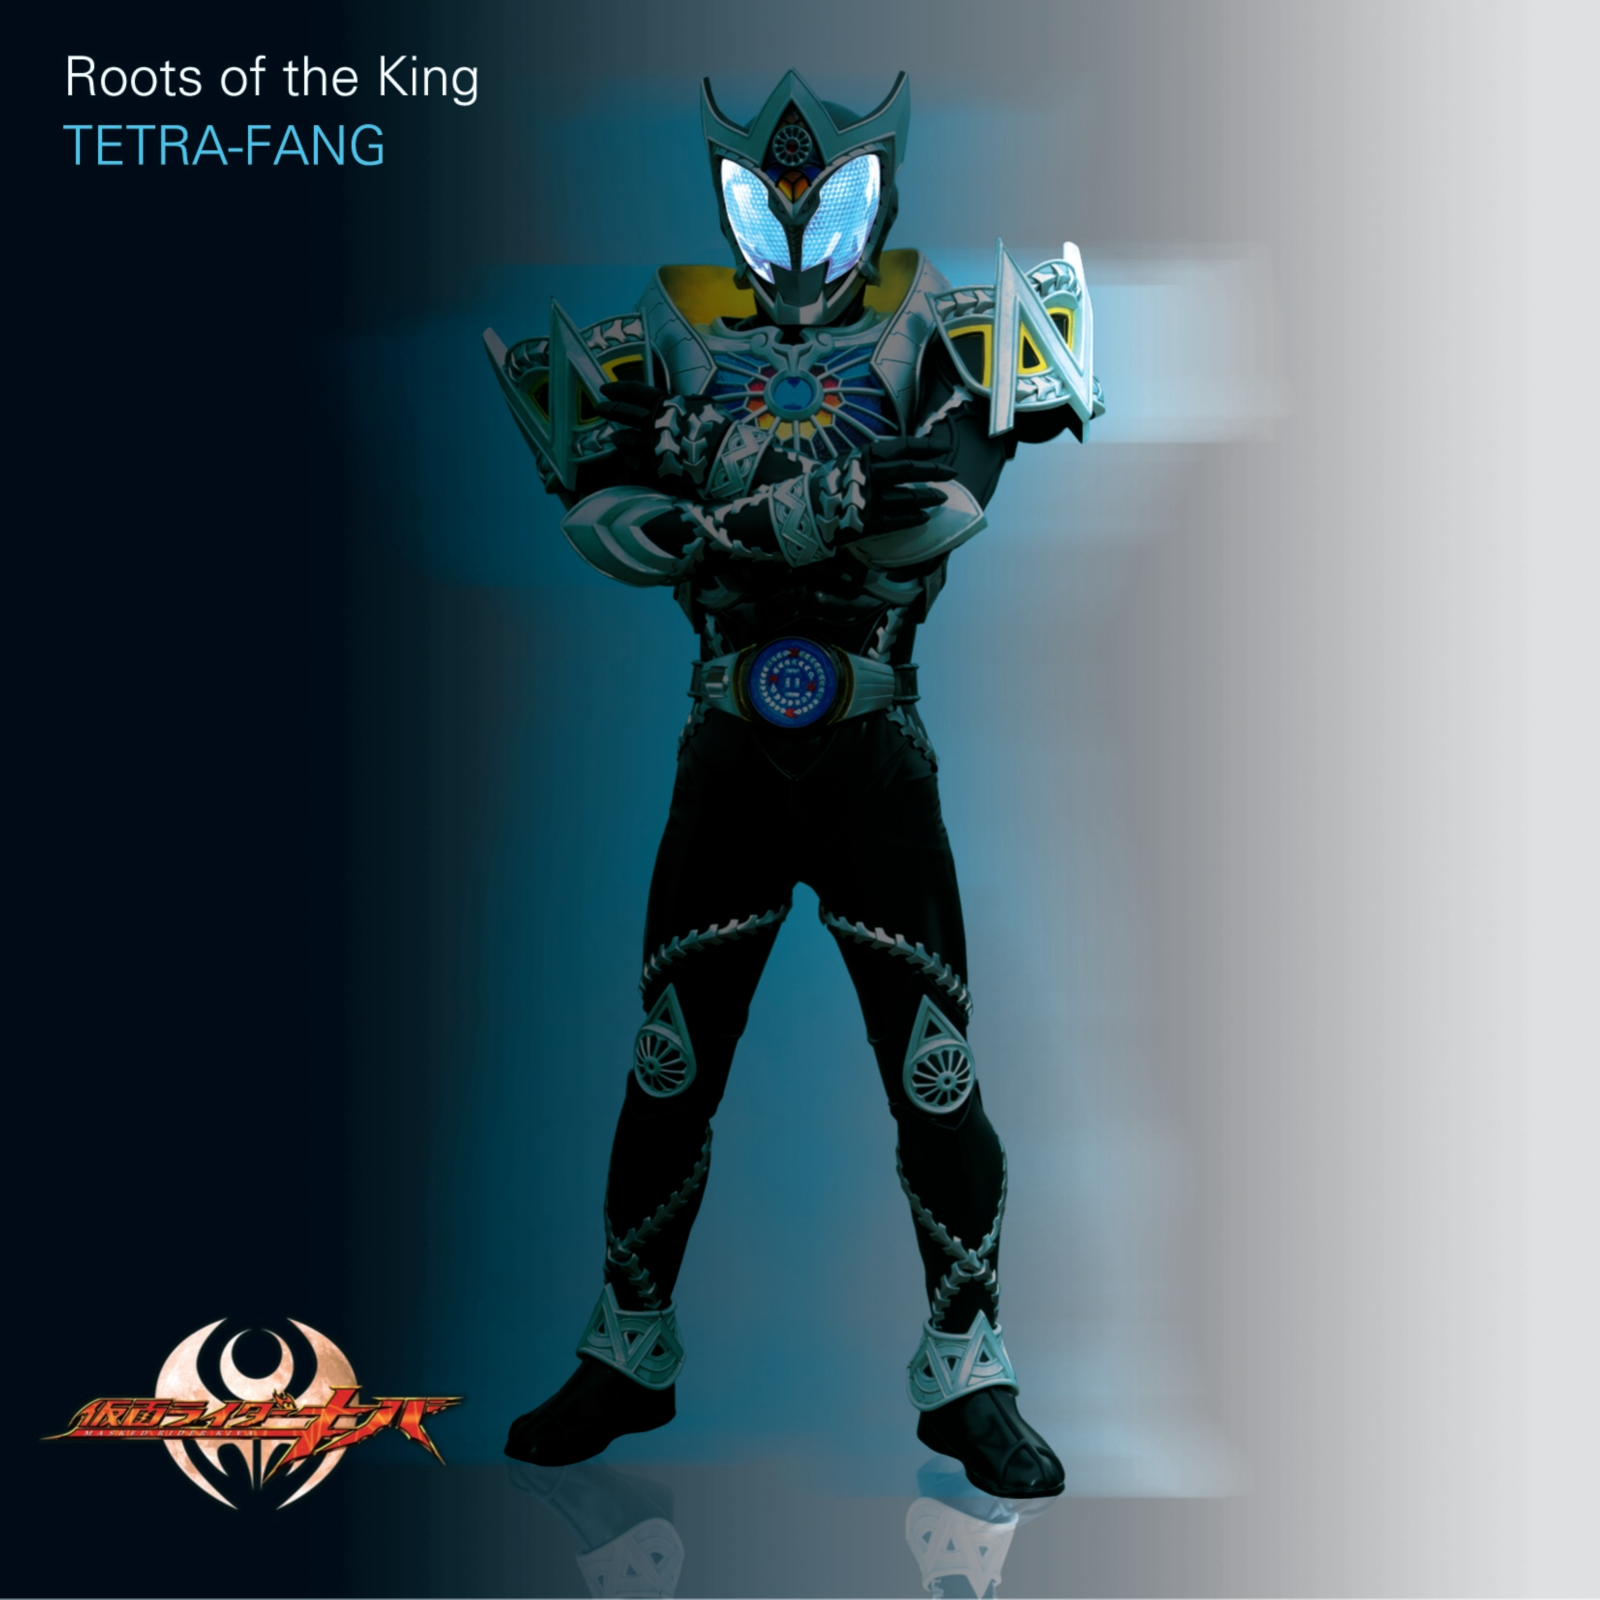 TETRA-FANG - Roots of the King (Instrumental)